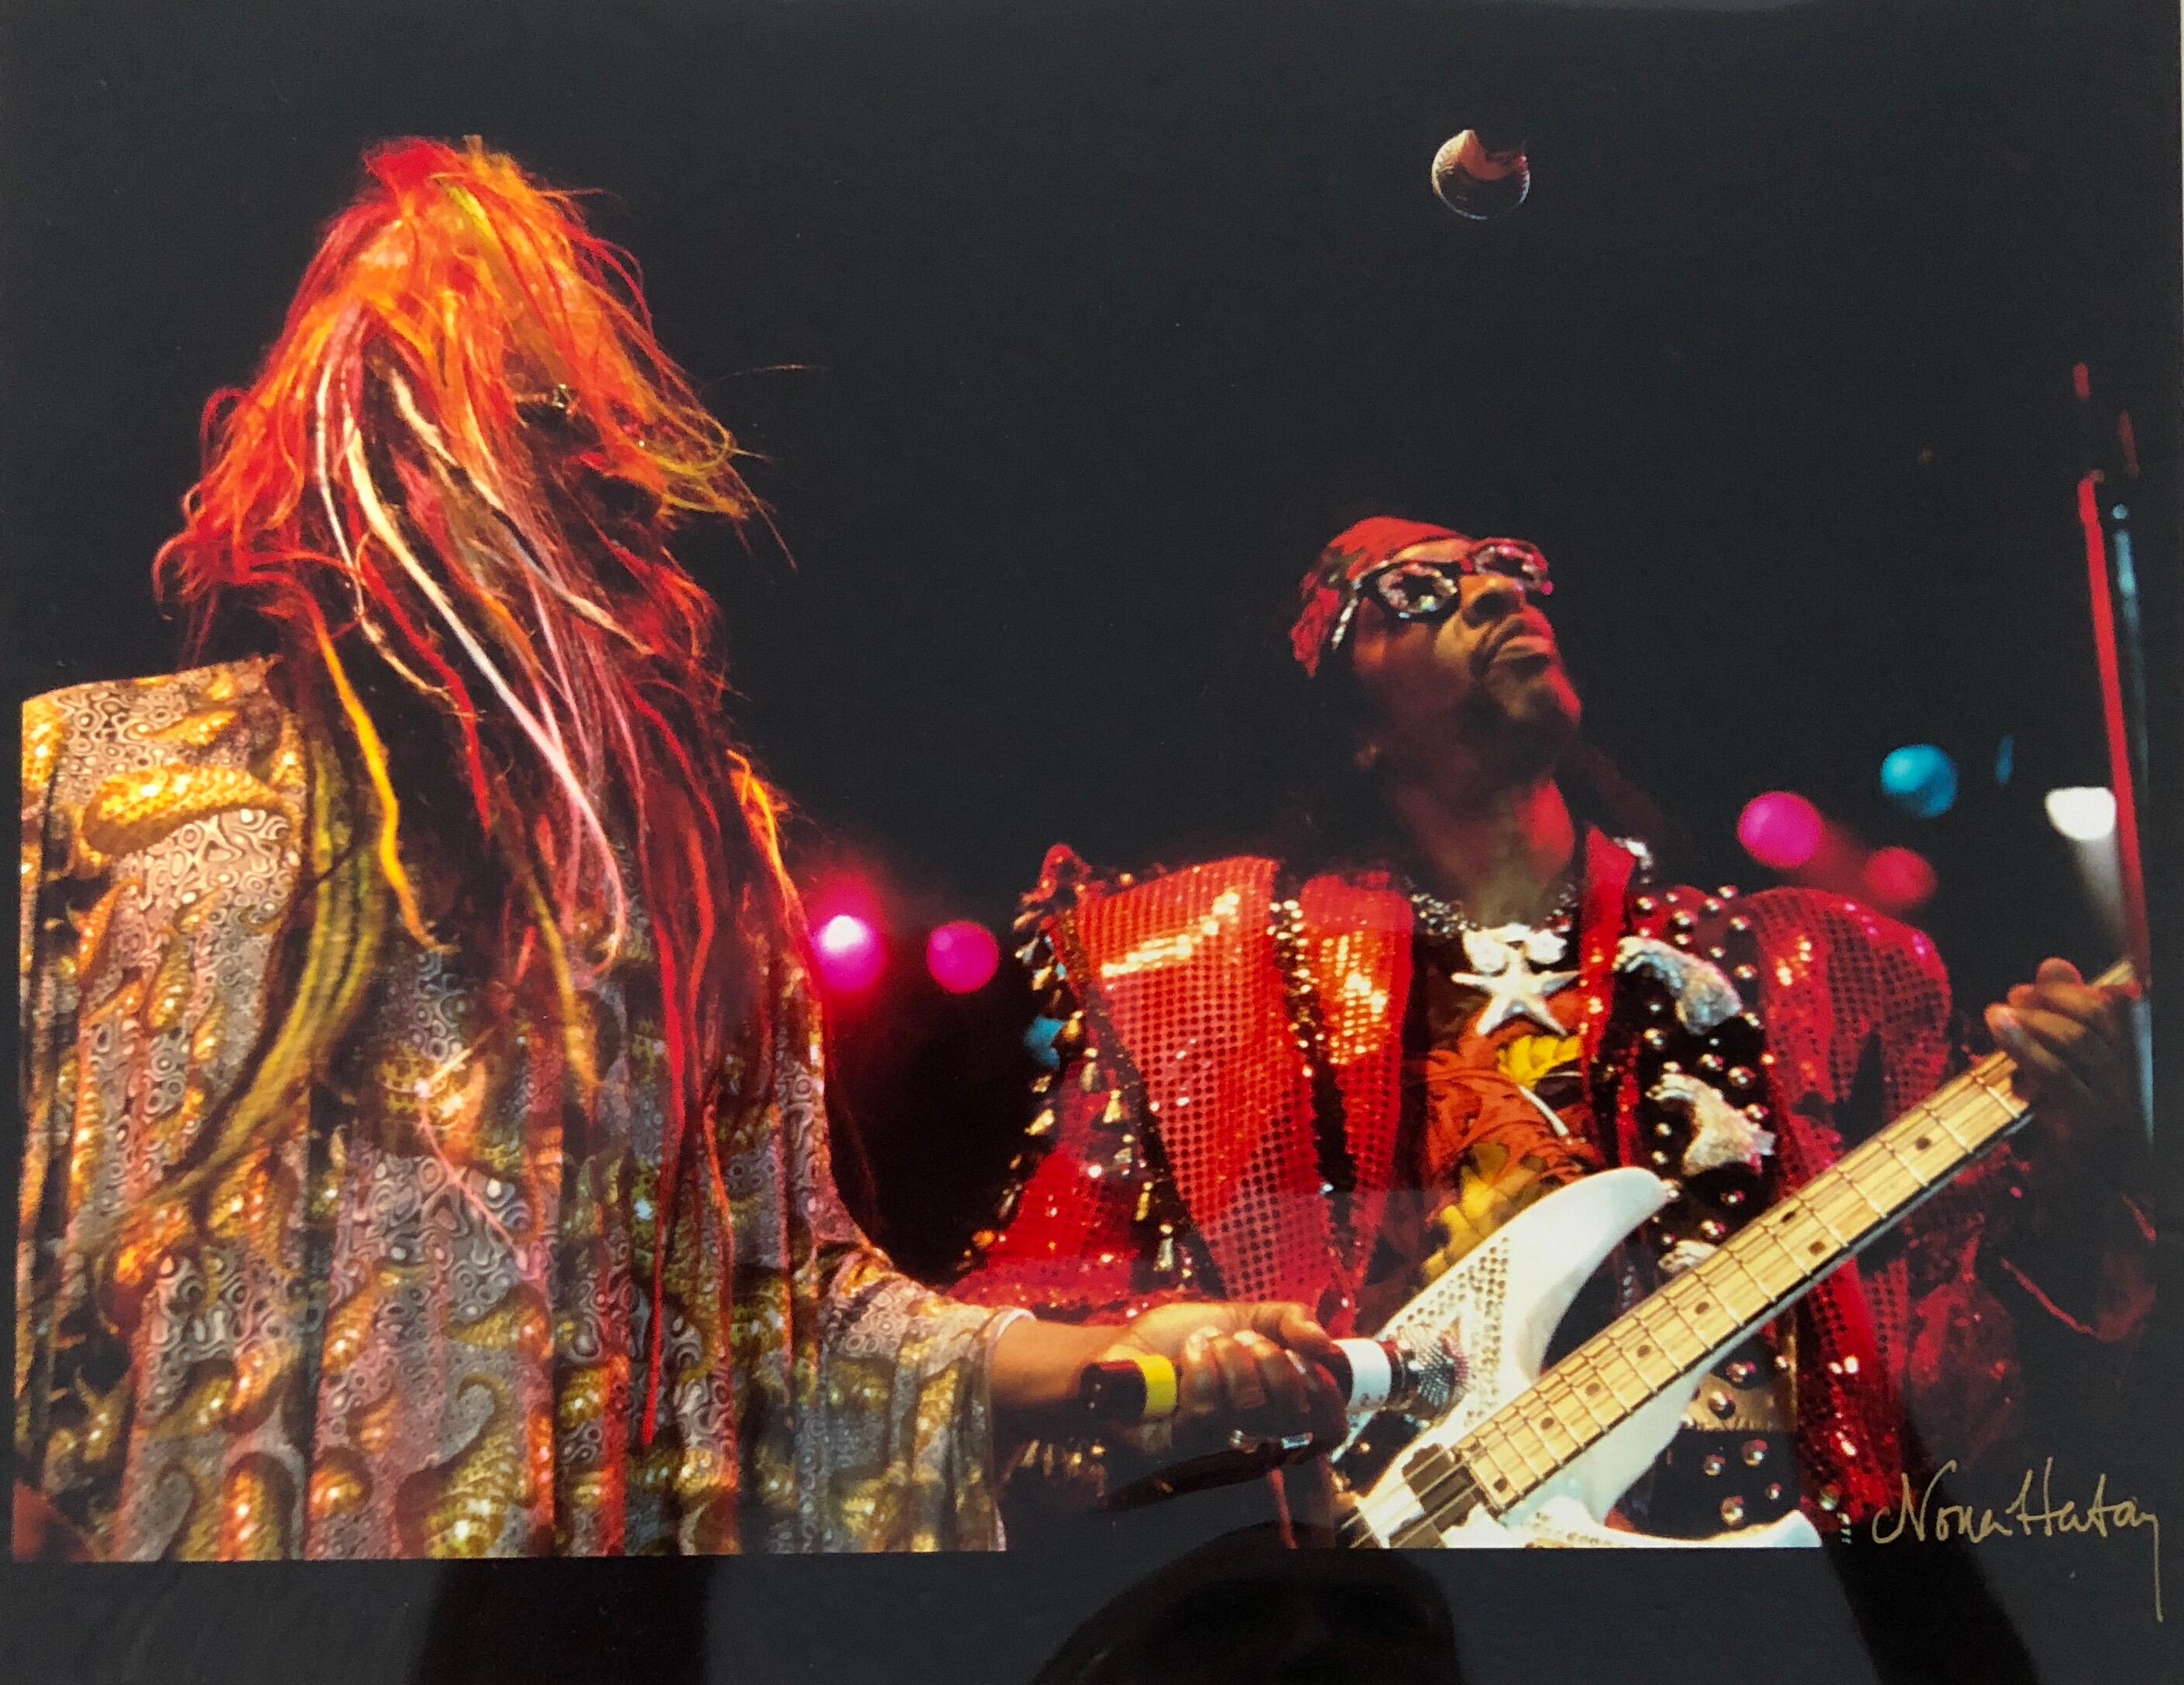 Color Rock & Roll Photo Hand Signed Woodstock Music Festival African American  - American Modern Photograph by Nona Hatay